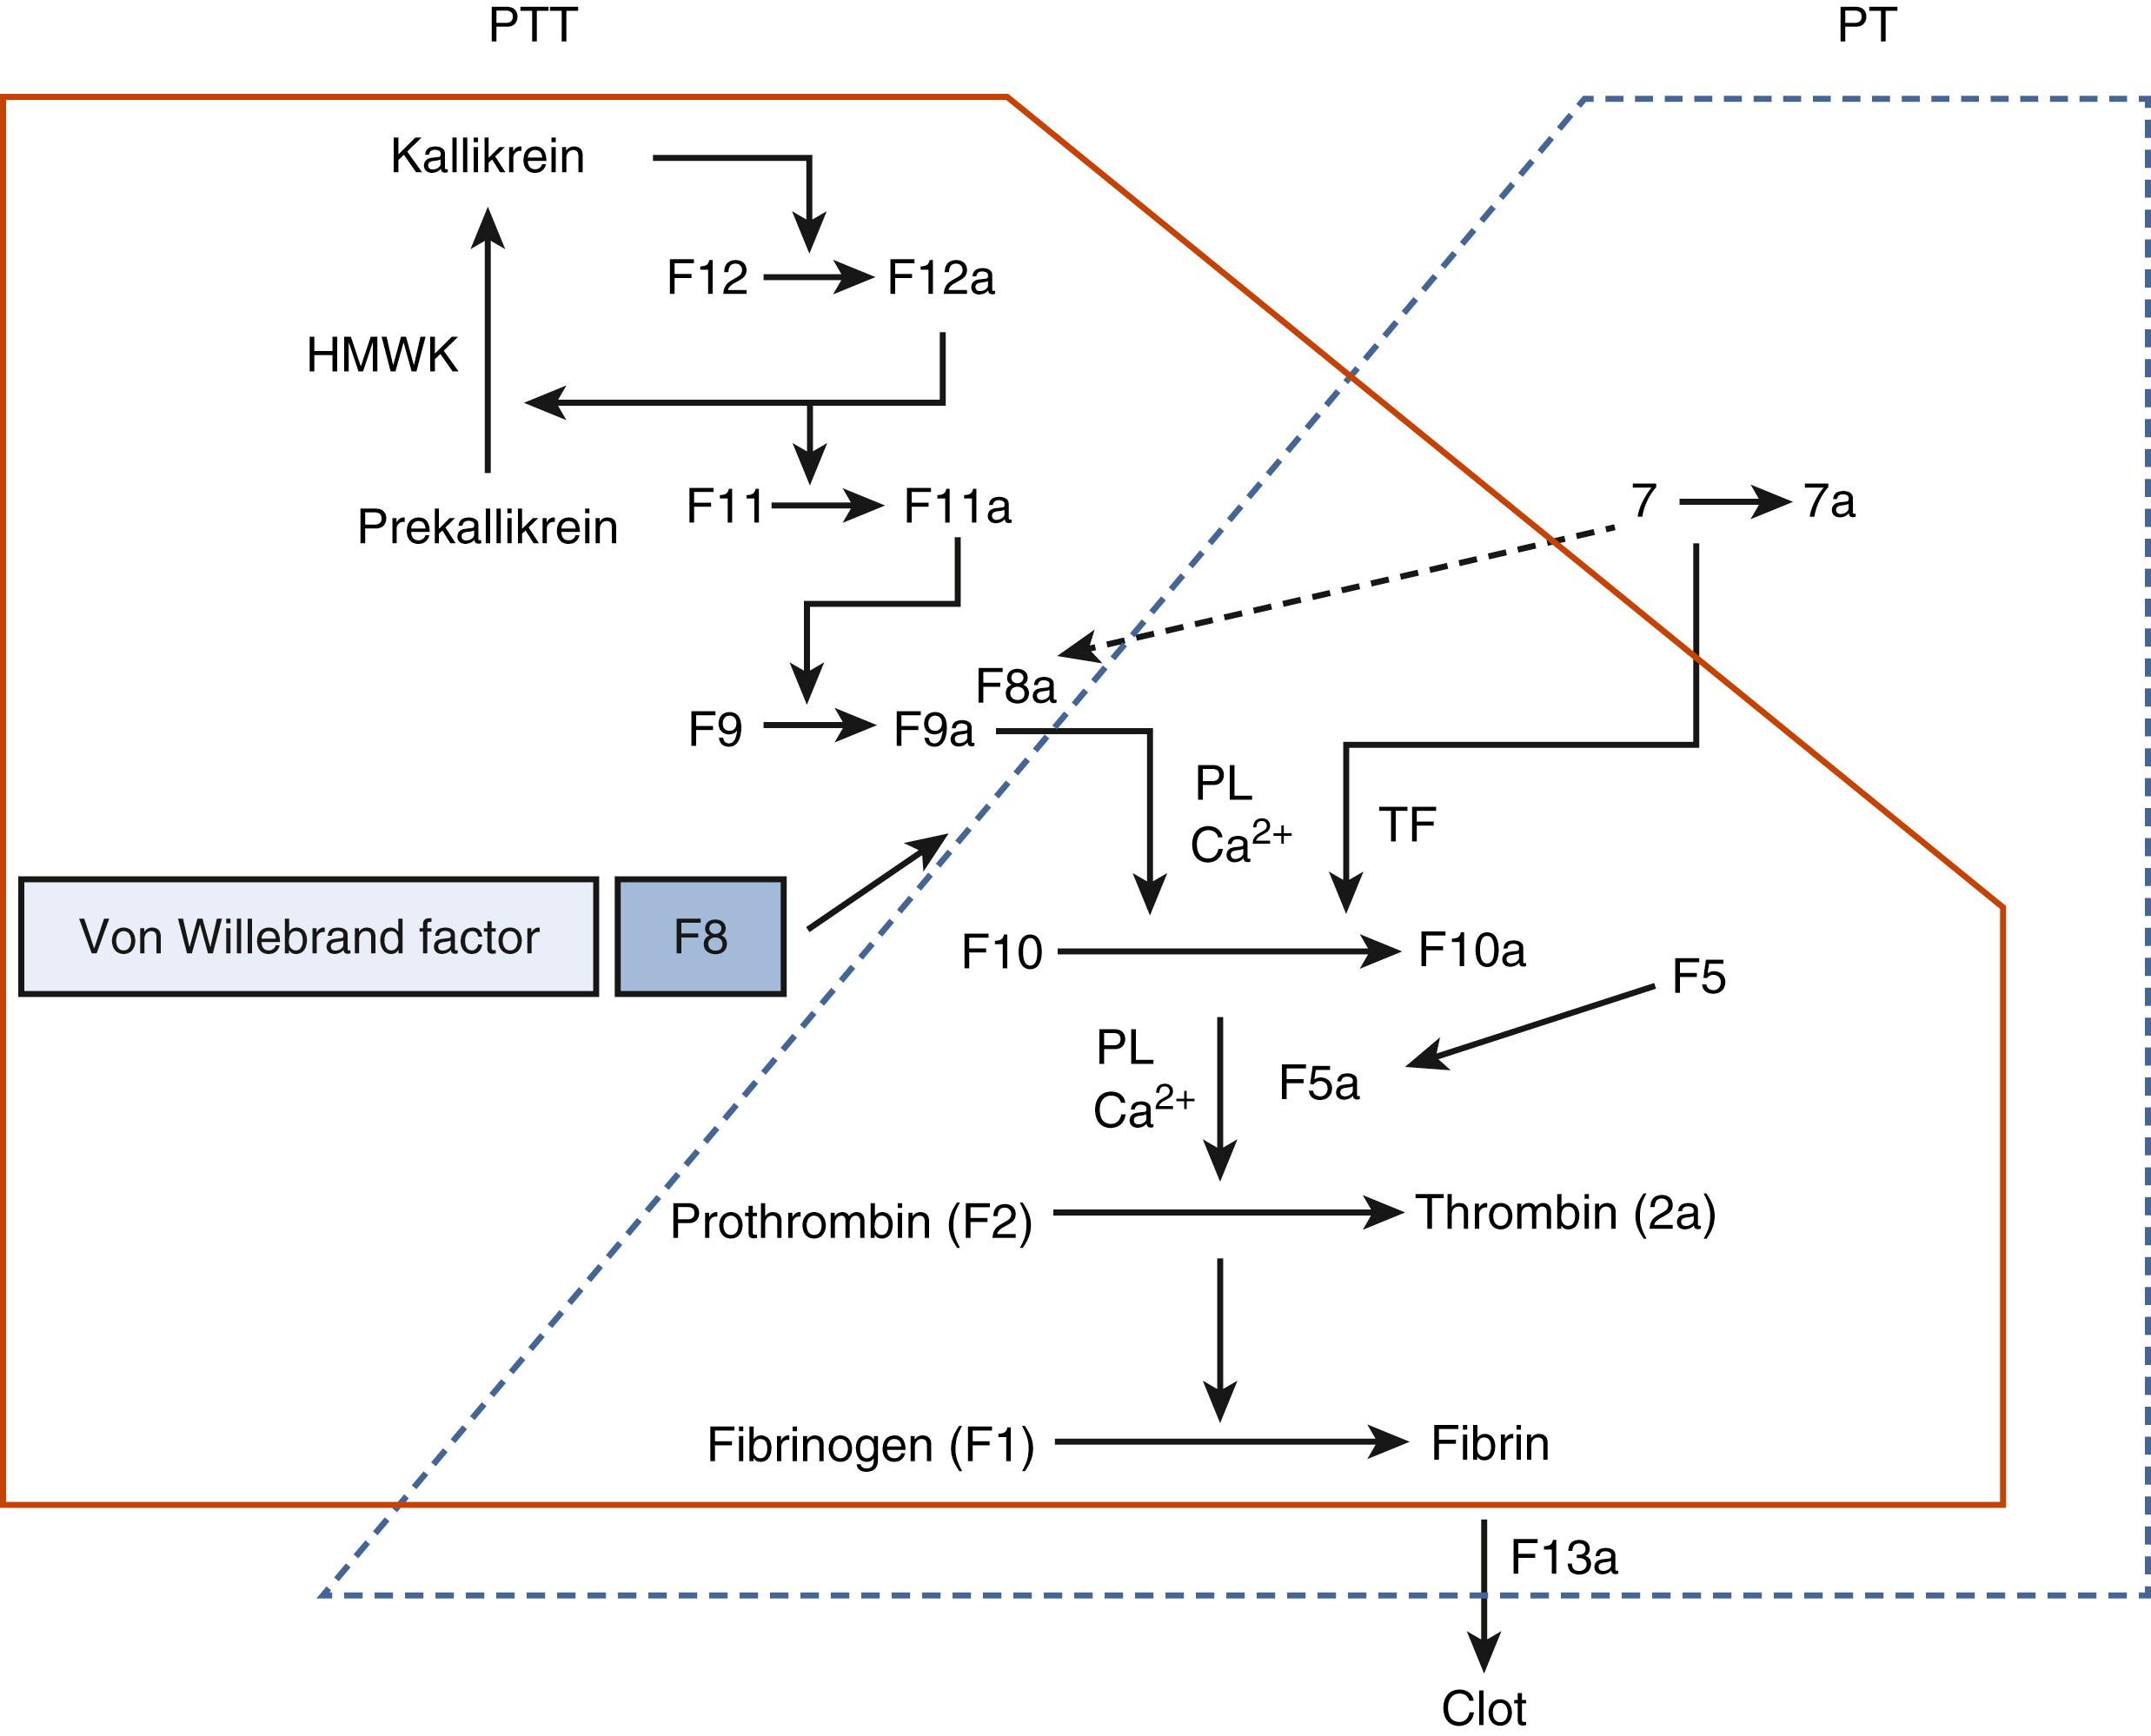 Fig. 51.6, Elements of the coagulation cascade measured by the prothrombin time (PT) and the partial thromboplastin time (PTT). Note that prekallikrein (PK), high-molecular-weight kininogen (HMWK), and factor 12 are shown in this figure and not in the depiction of the coagulation cascade in Fig. 51.1, because a deficiency of PK, HMWK, or factor 12 can cause a prolongation of the PTT. However, a deficiency of any of these proteins alone is not associated with a clinical bleeding disorder. Ca 2+ , calcium; PL, platelet phospholipid surface; TF, tissue factor.